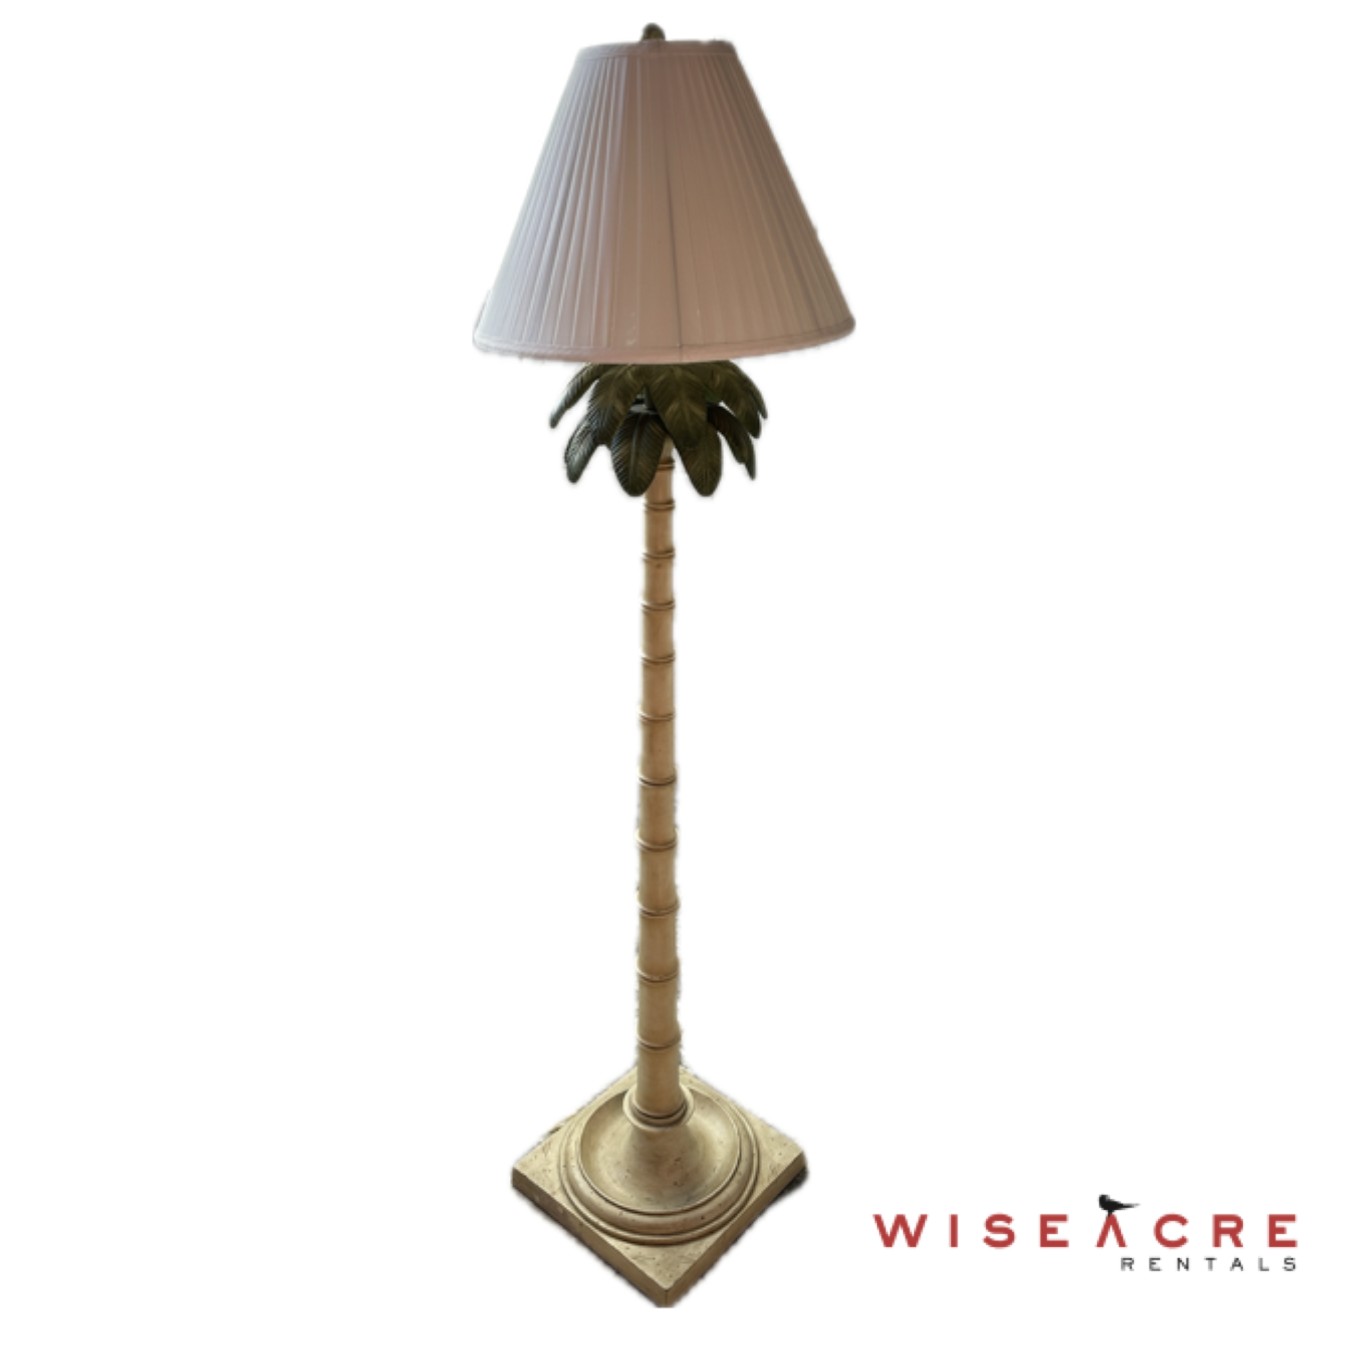 Lighting, Wooden lamp with palm tree design, metal base, Cream, Green, Gold